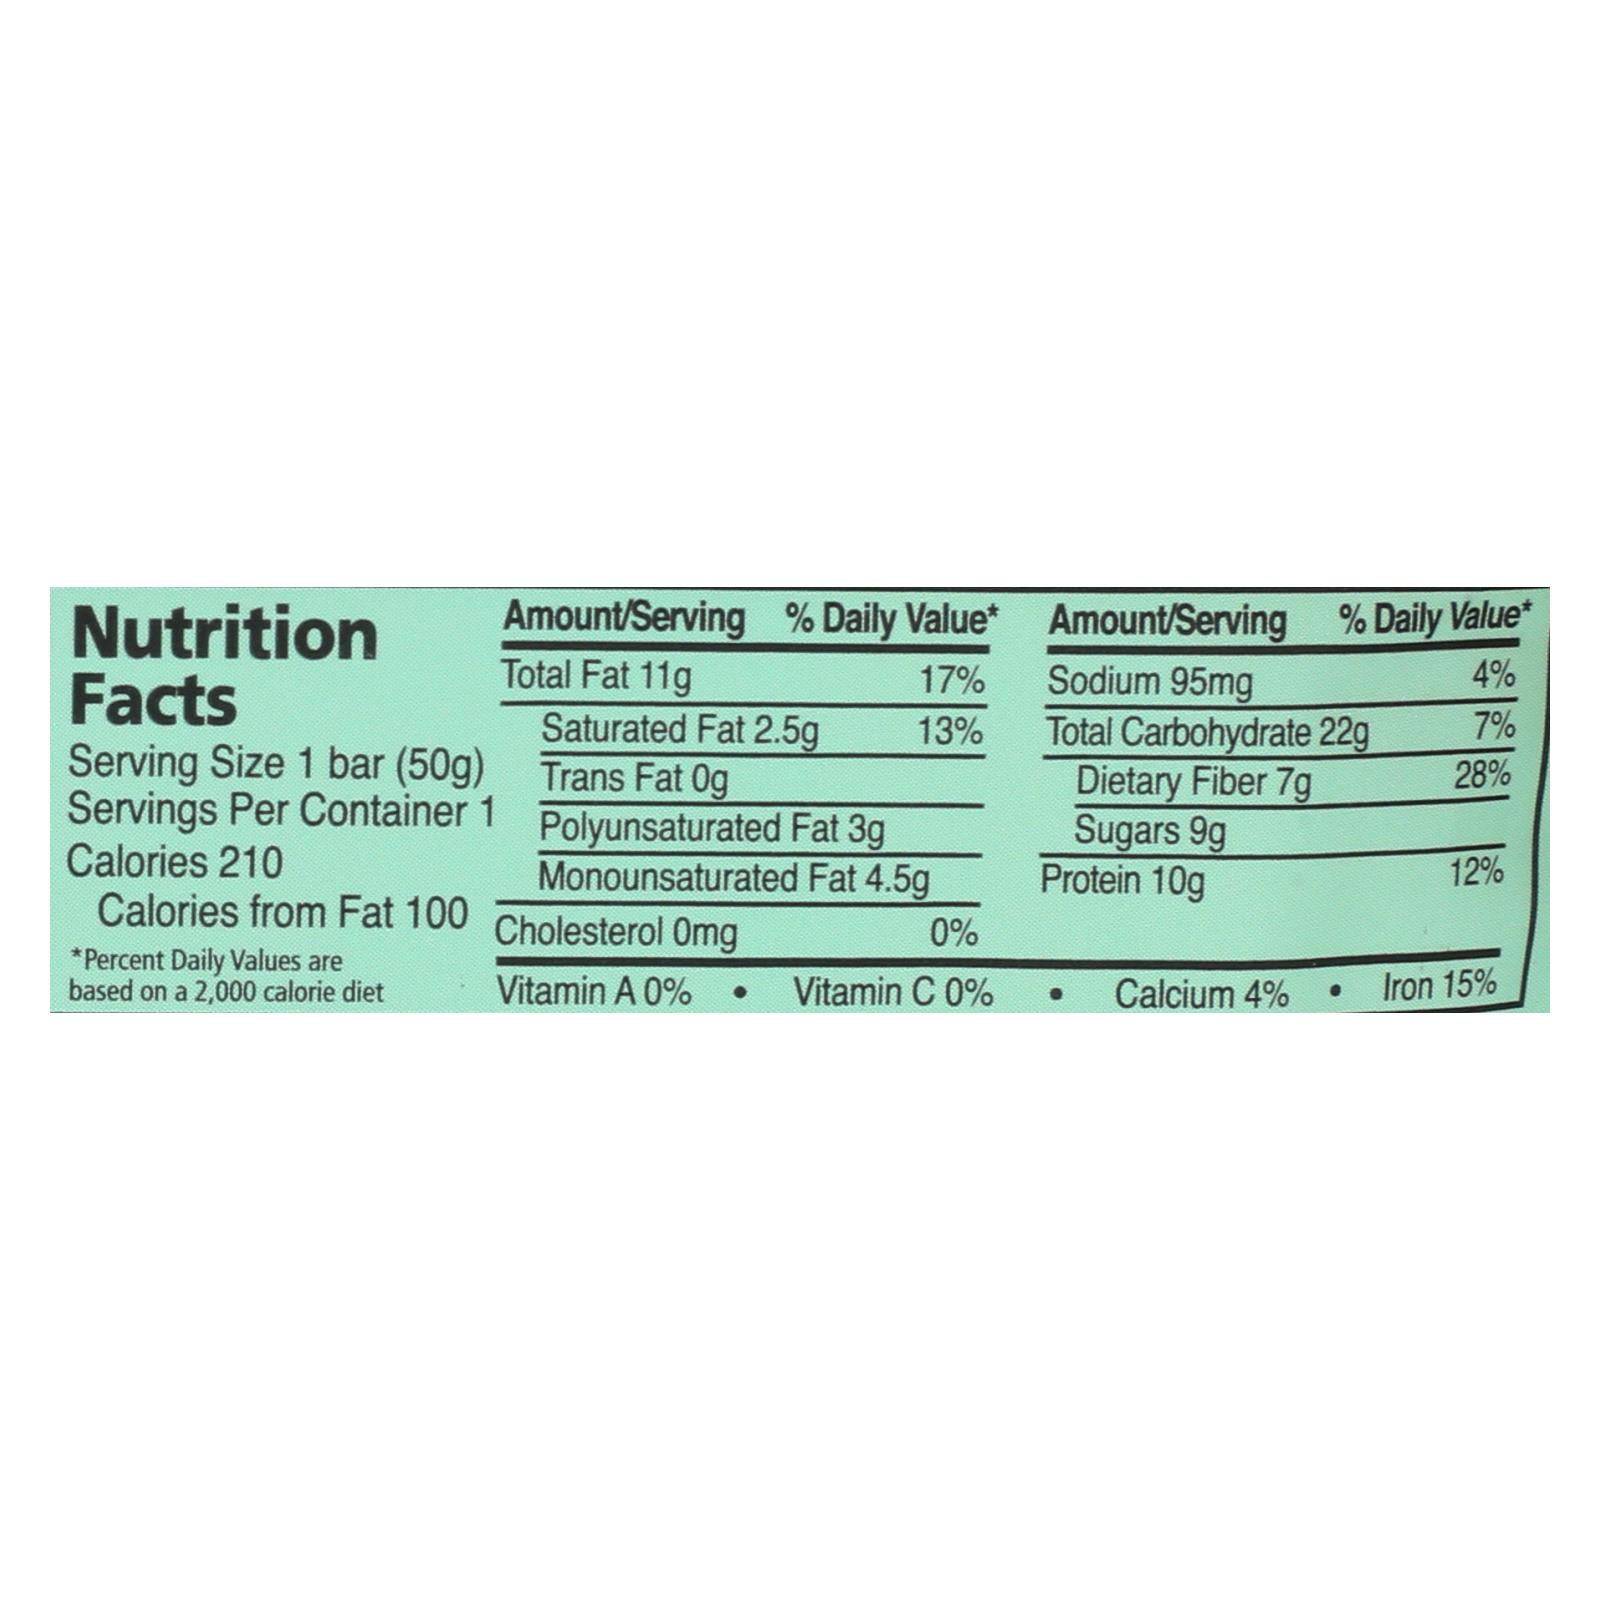 Zing Bars - Nutrition Bar - Dark Chocolate Sunflower Mint - Nut Free - 1.76 Oz Bars - Case Of 12 | OnlyNaturals.us